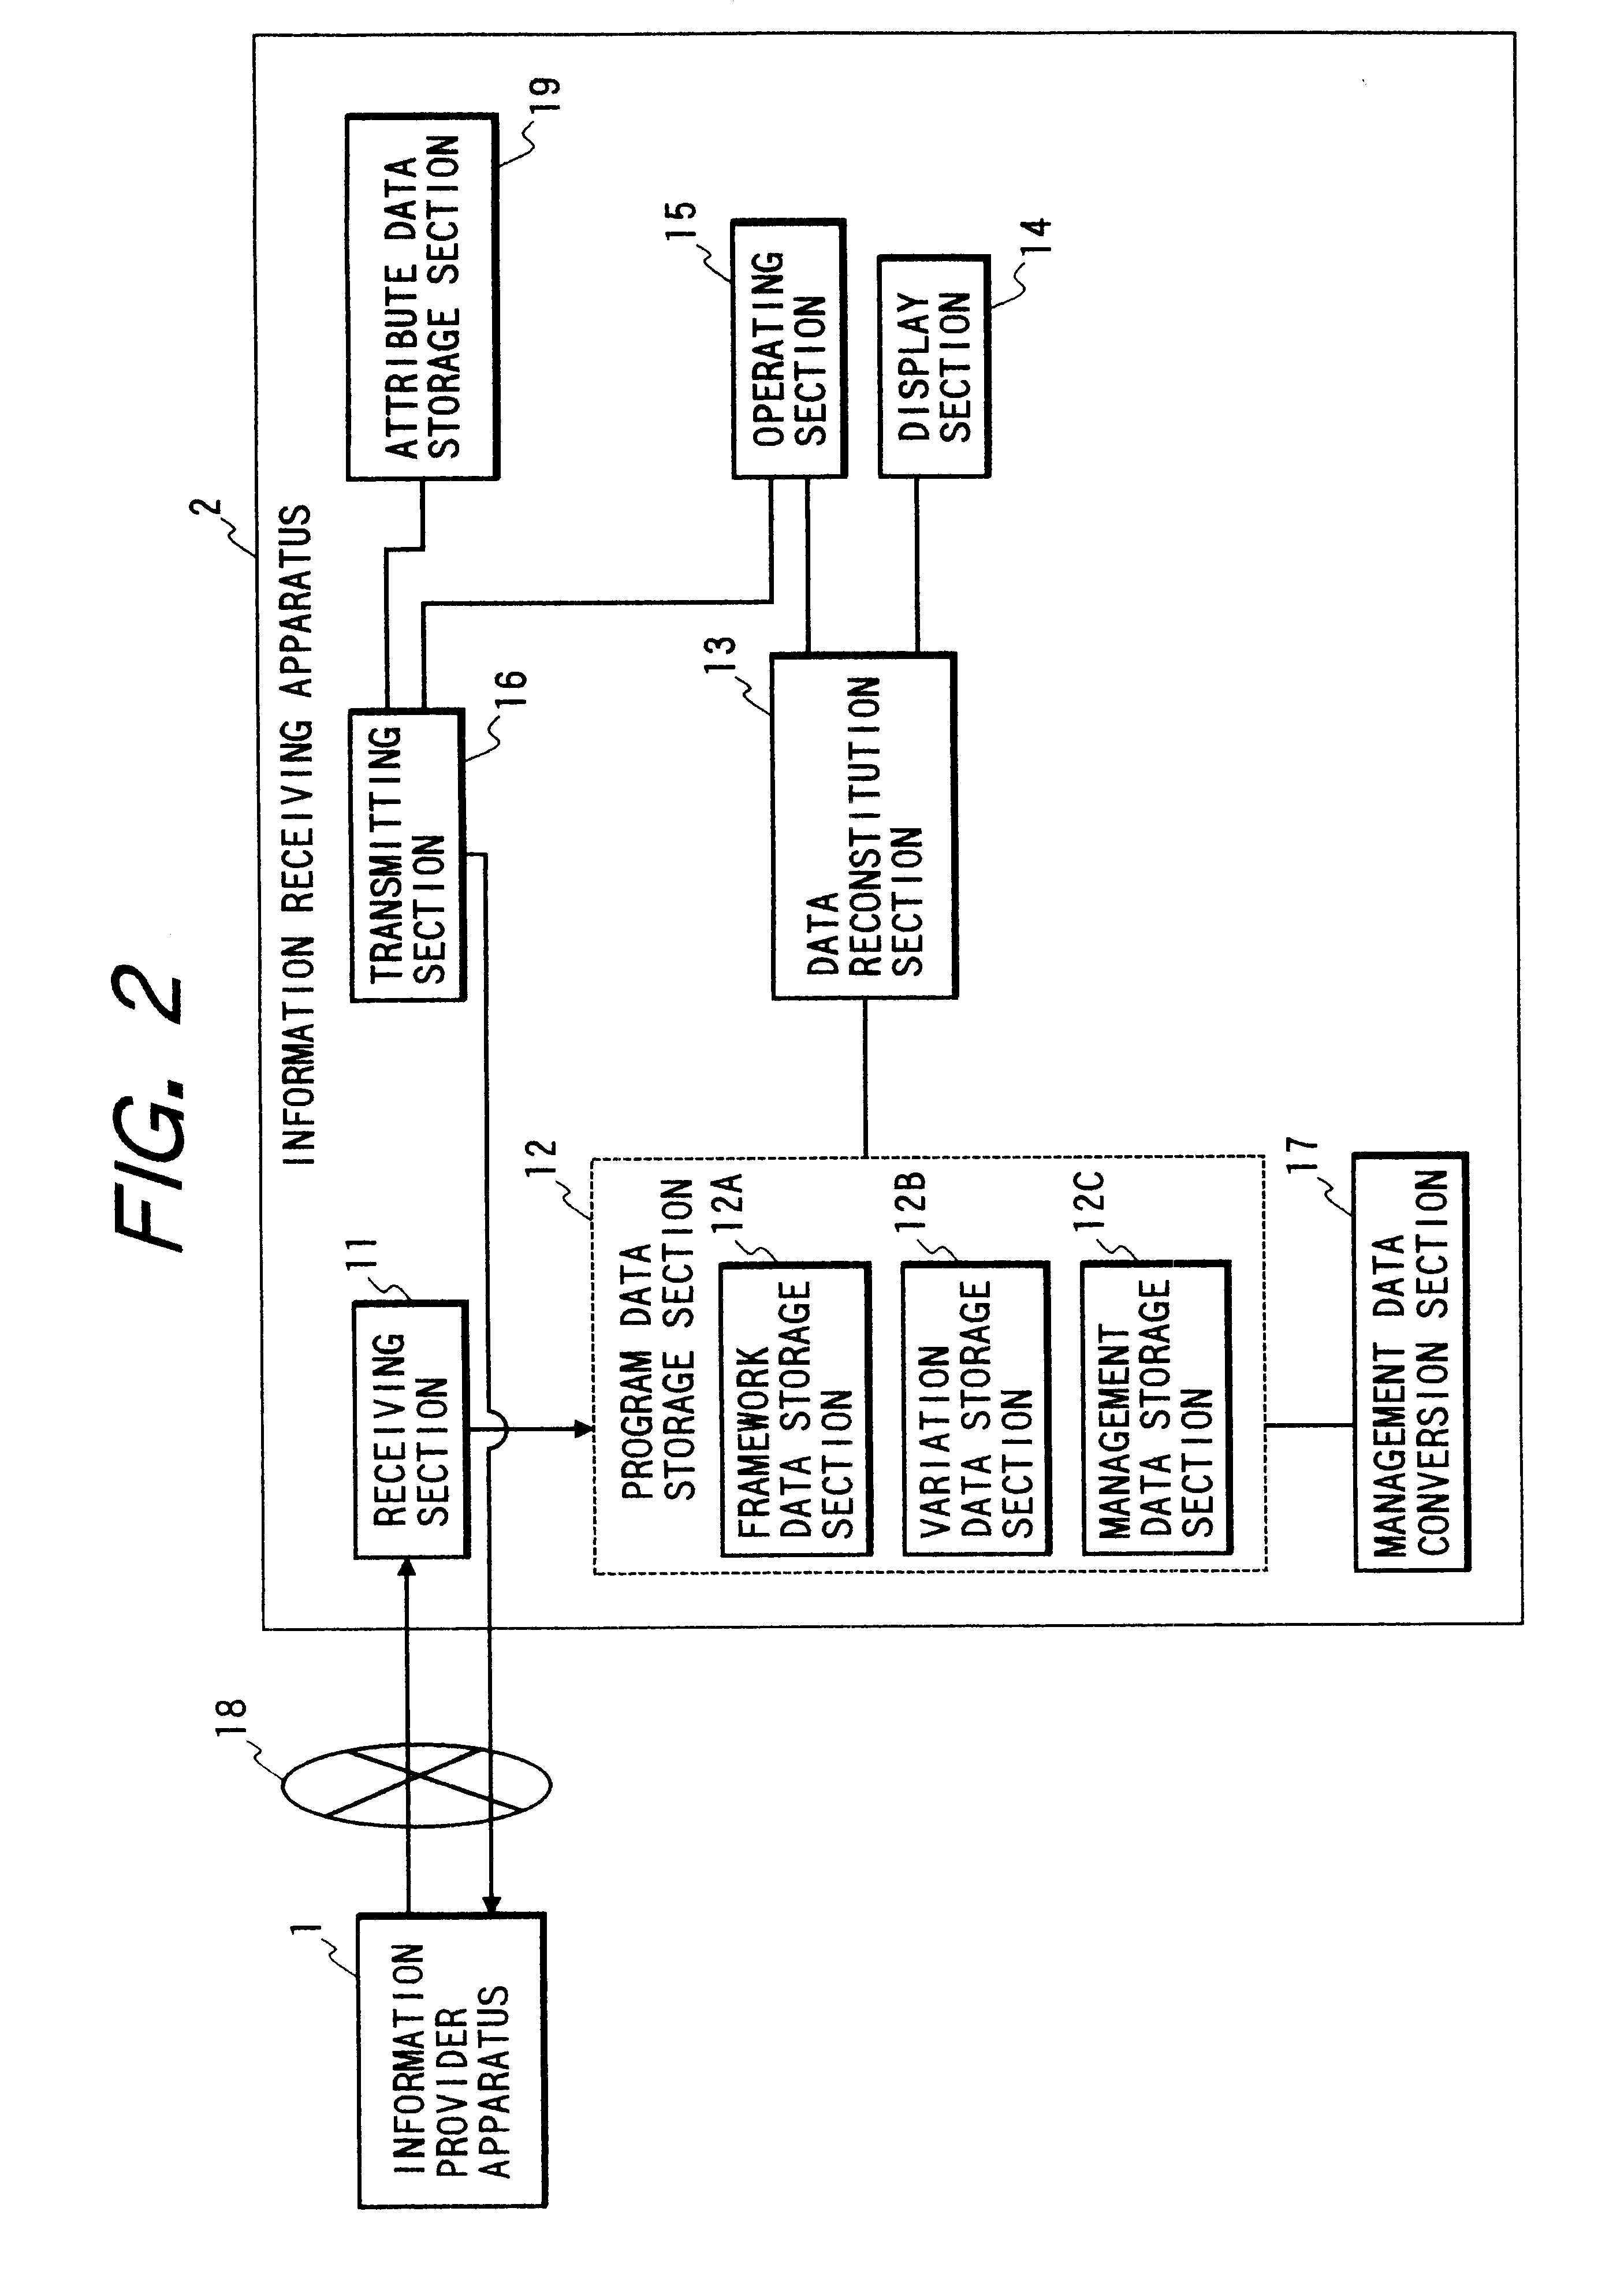 Information providing method which enables data communication costs to be reduced, and information providing system for implementing the method